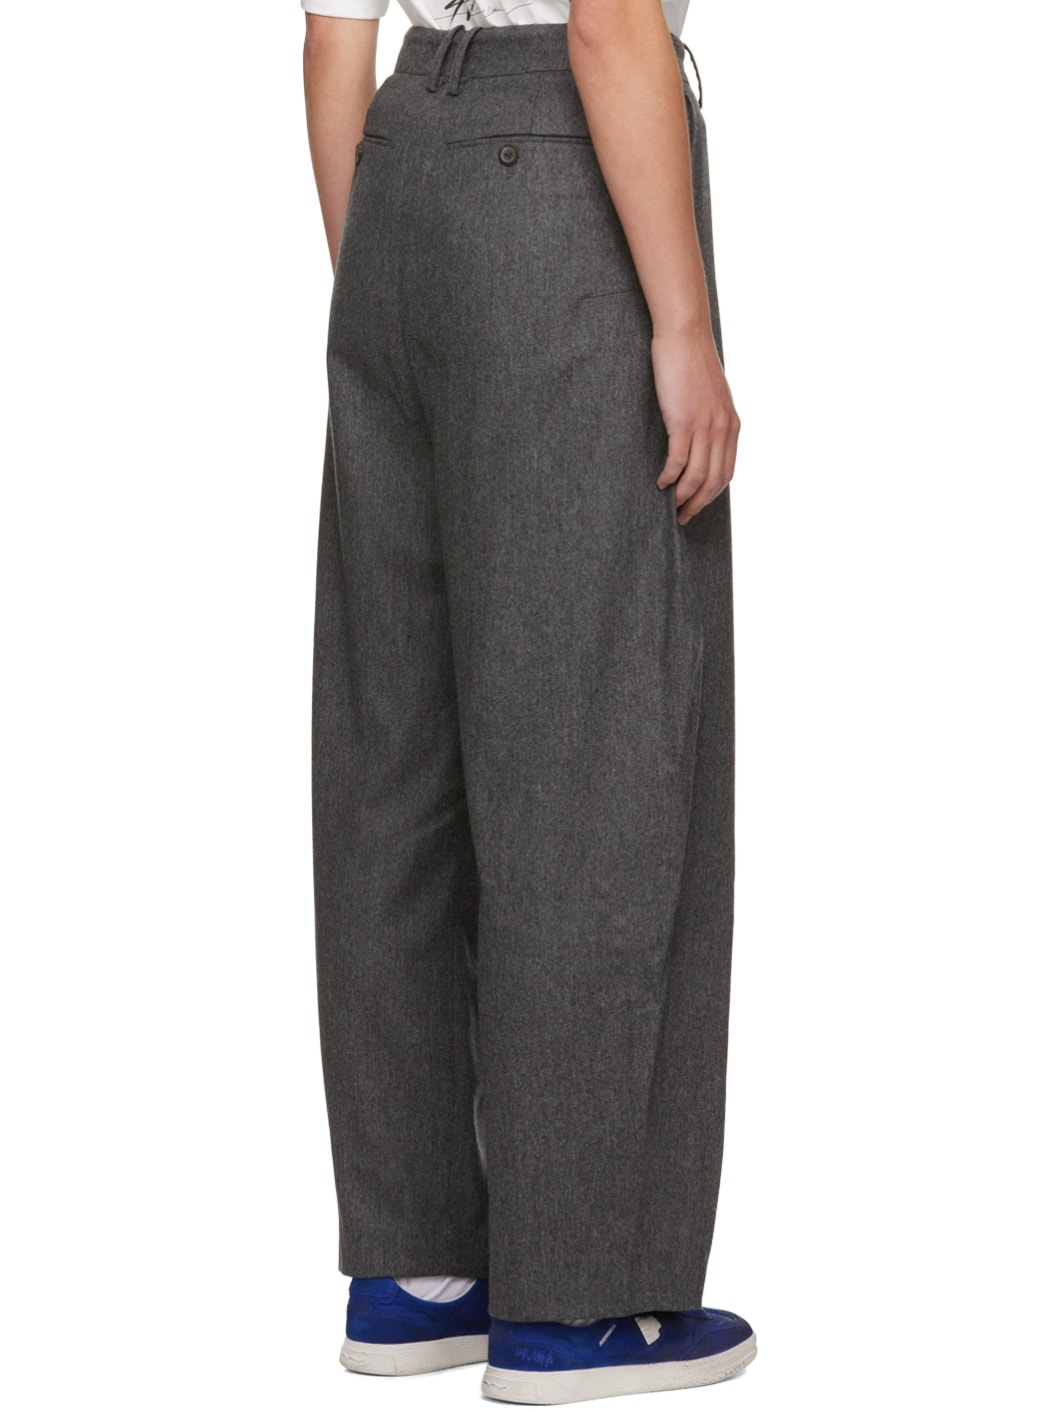 Gray Oceola Trousers - 3